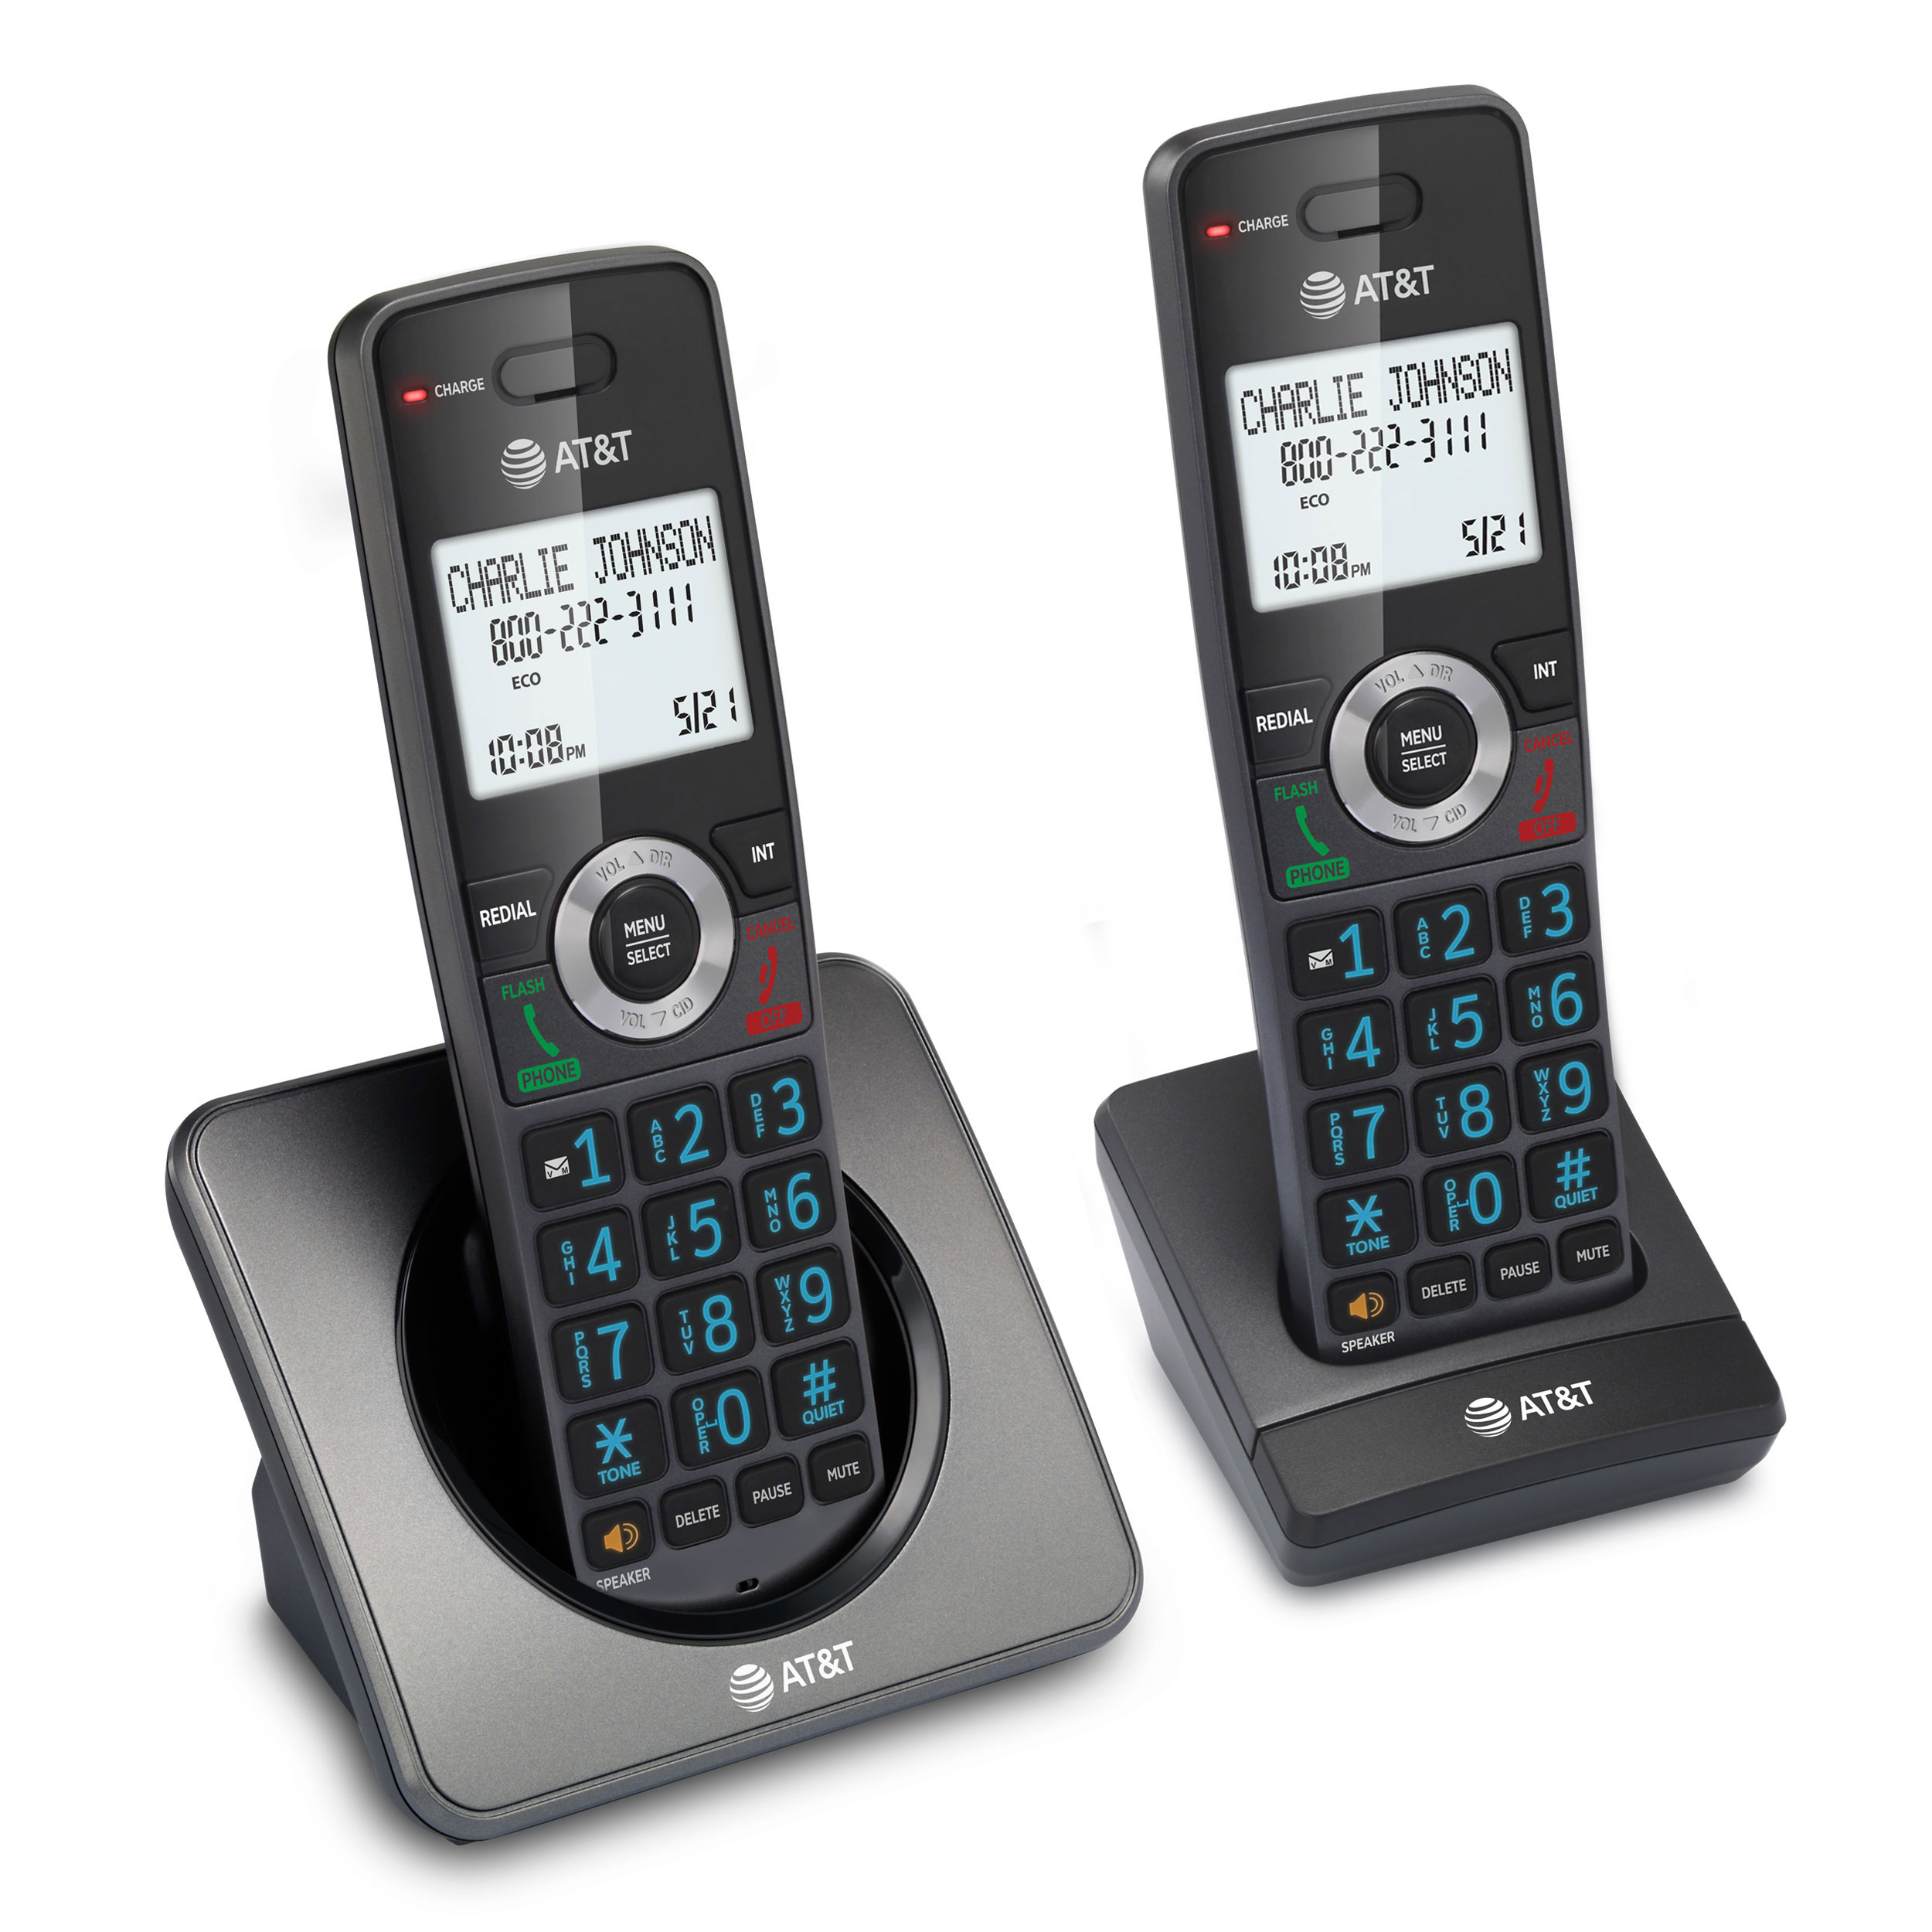 2-Handset Cordless Home Phone with Call Block (Graphite & Black) - view 10